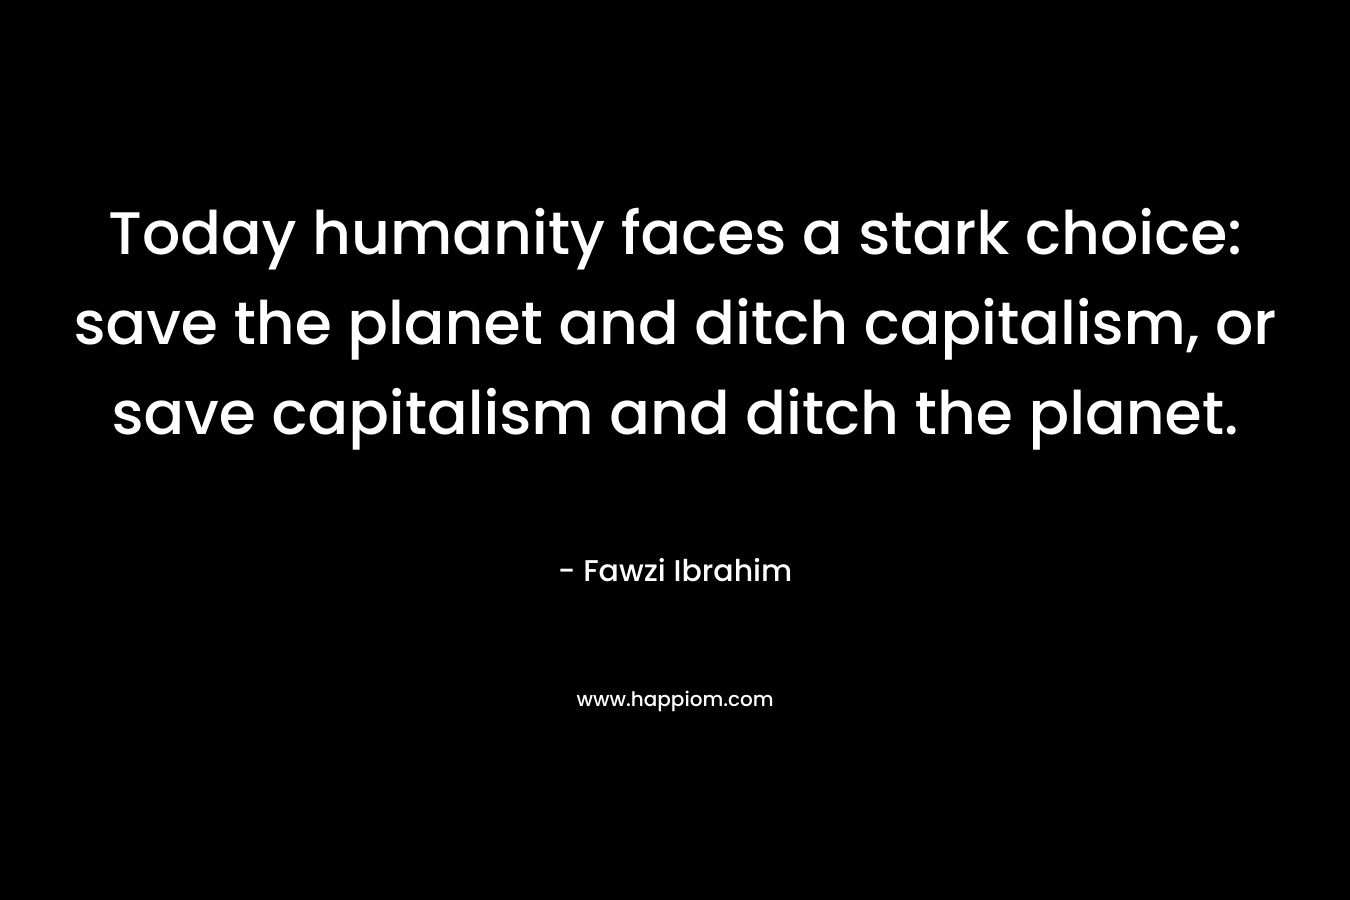 Today humanity faces a stark choice: save the planet and ditch capitalism, or save capitalism and ditch the planet. – Fawzi Ibrahim